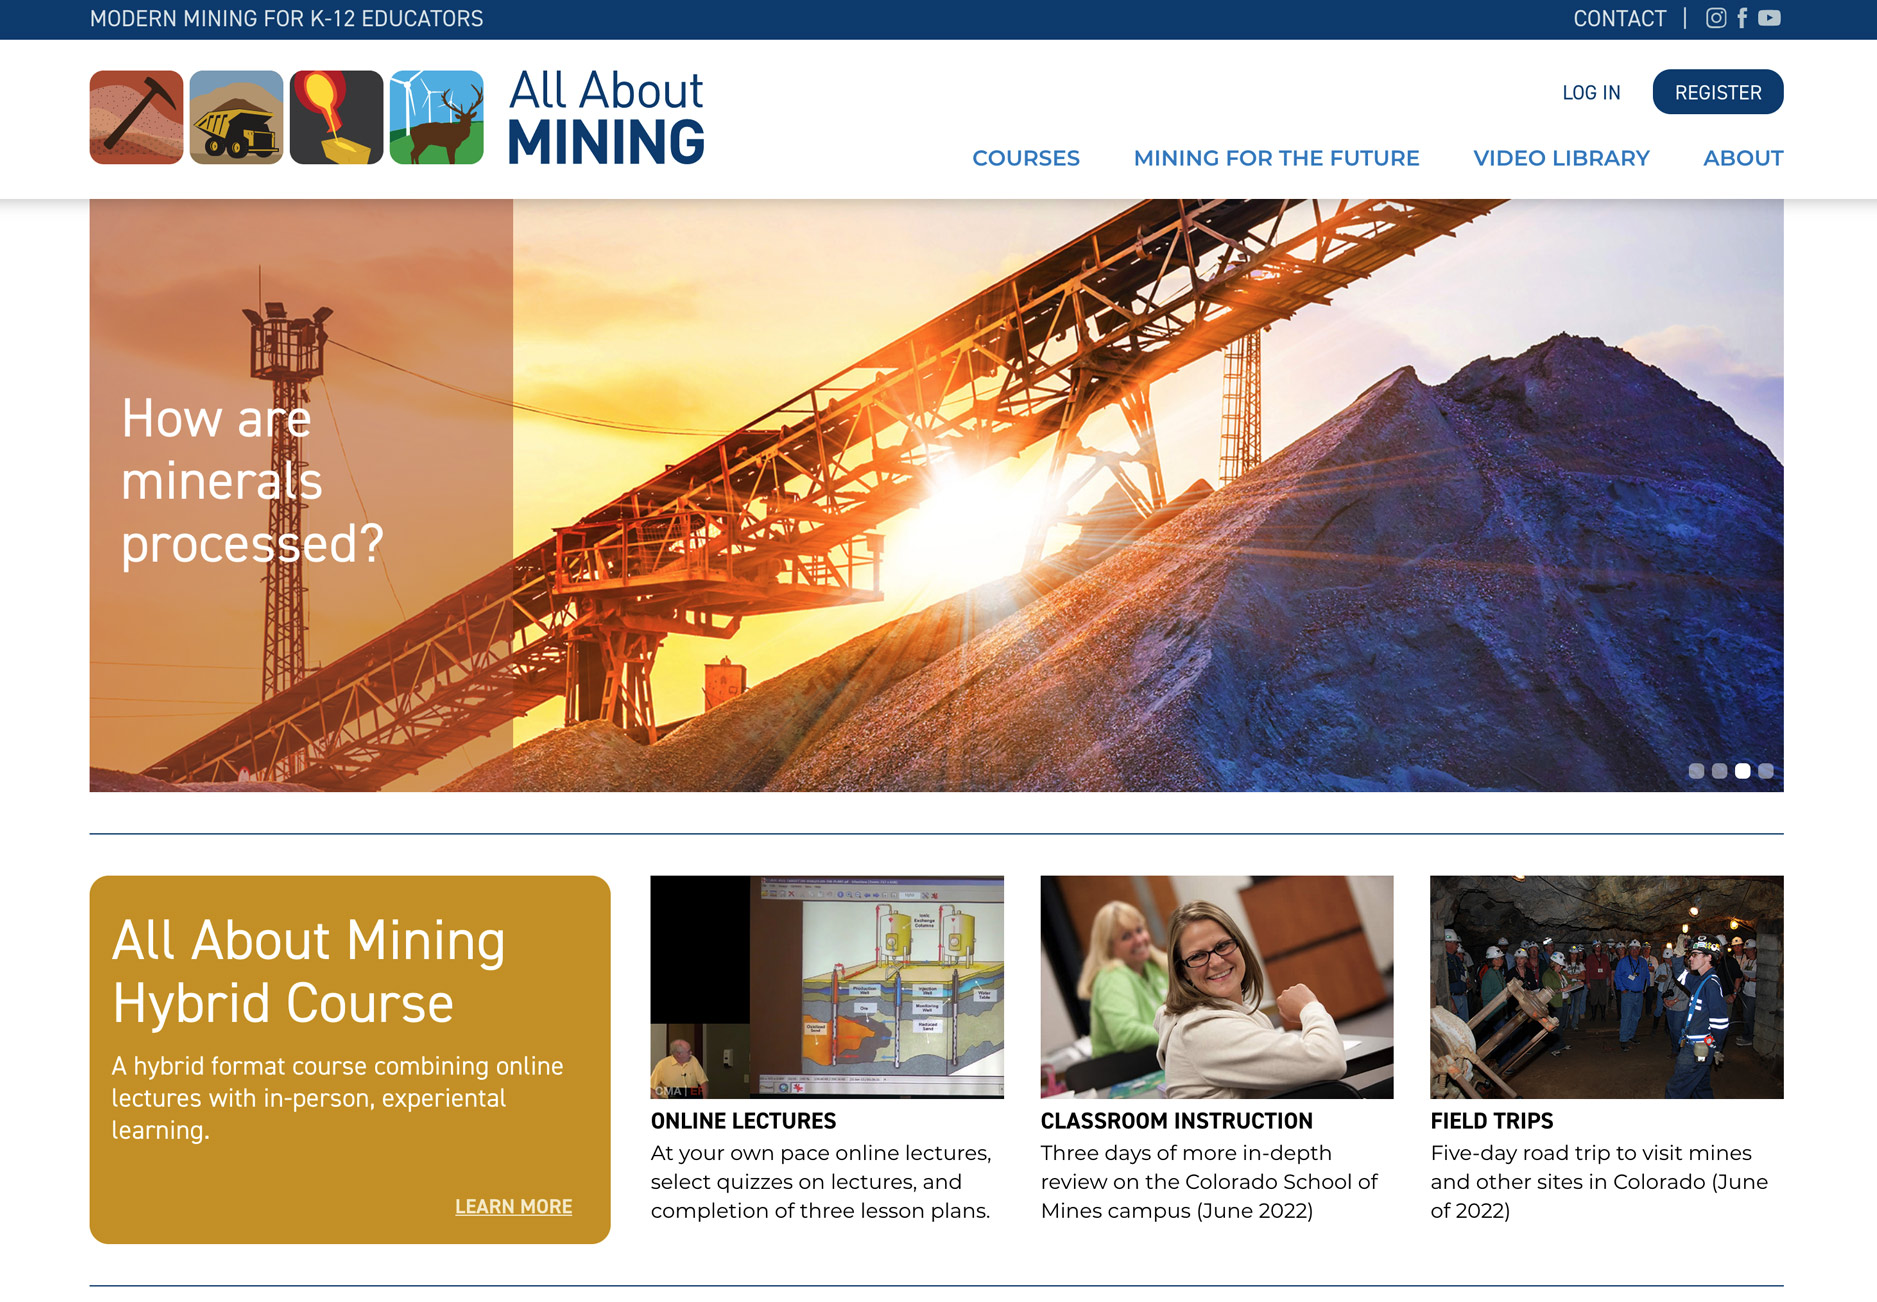 All About Mining